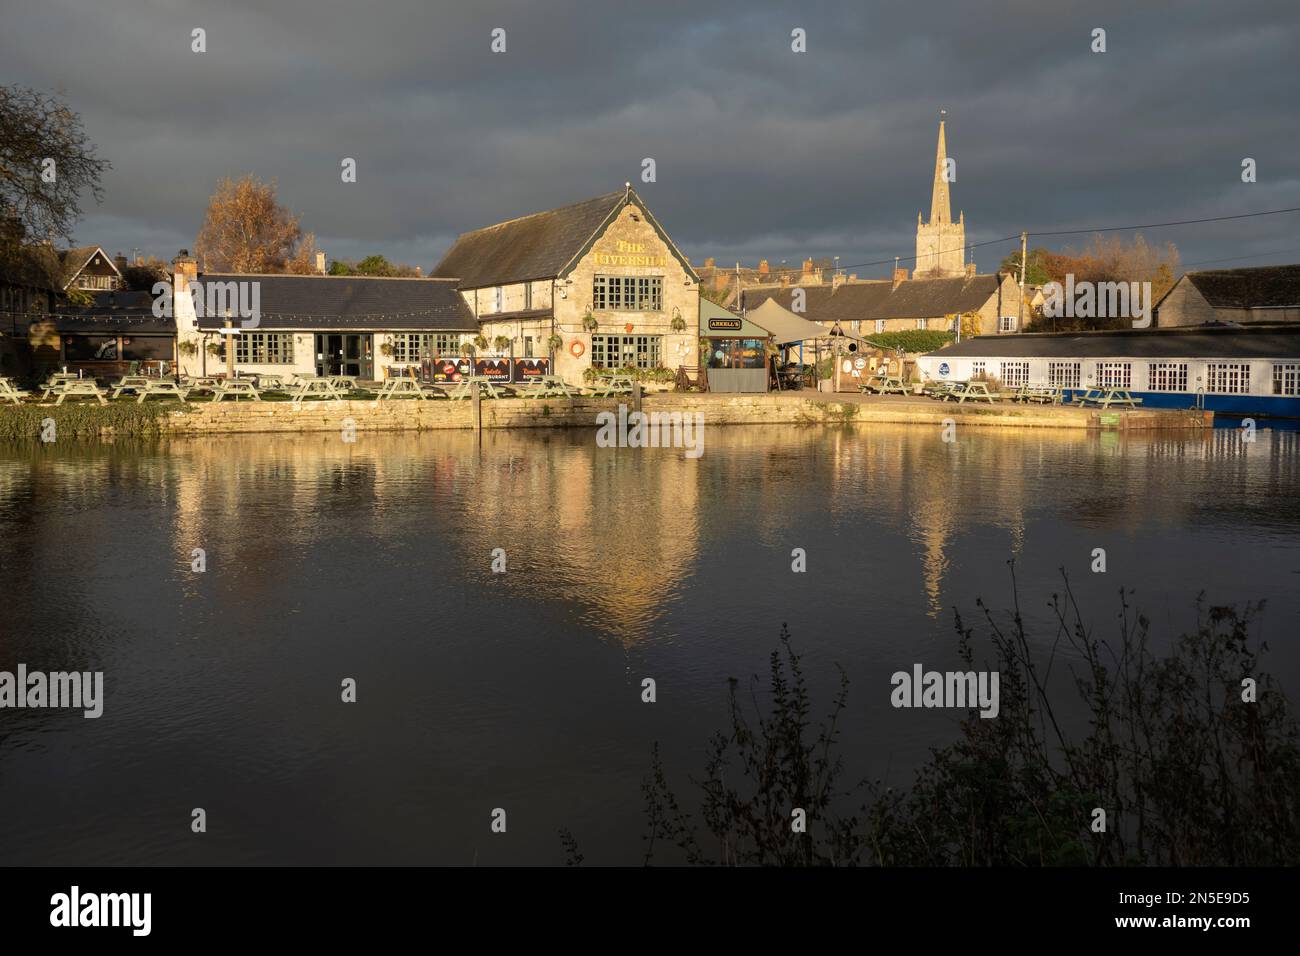 The Riverside Pub and St Lawrence Church Near the River Thames, Lechlade-on-Thames, Gloucestershire, England, Vereinigtes Königreich, Europa Stockfoto